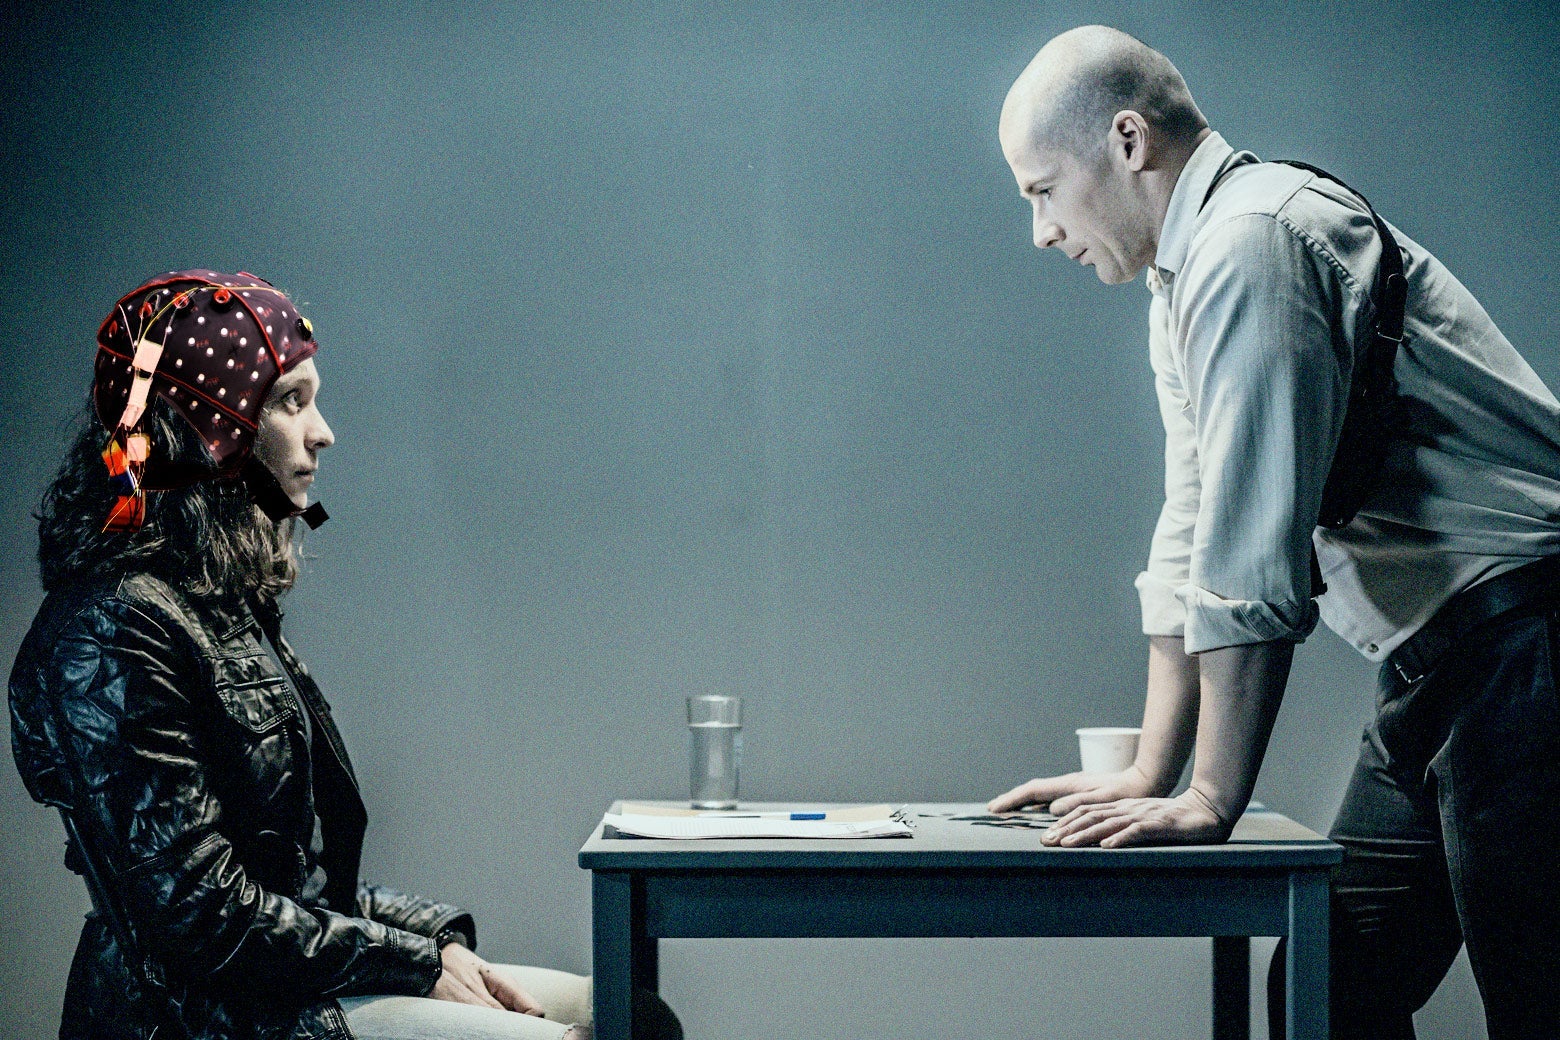 A woman sits in front of a table wearing a helmet with electrodes, while a man stands on the other side, his hands on the table, looming.